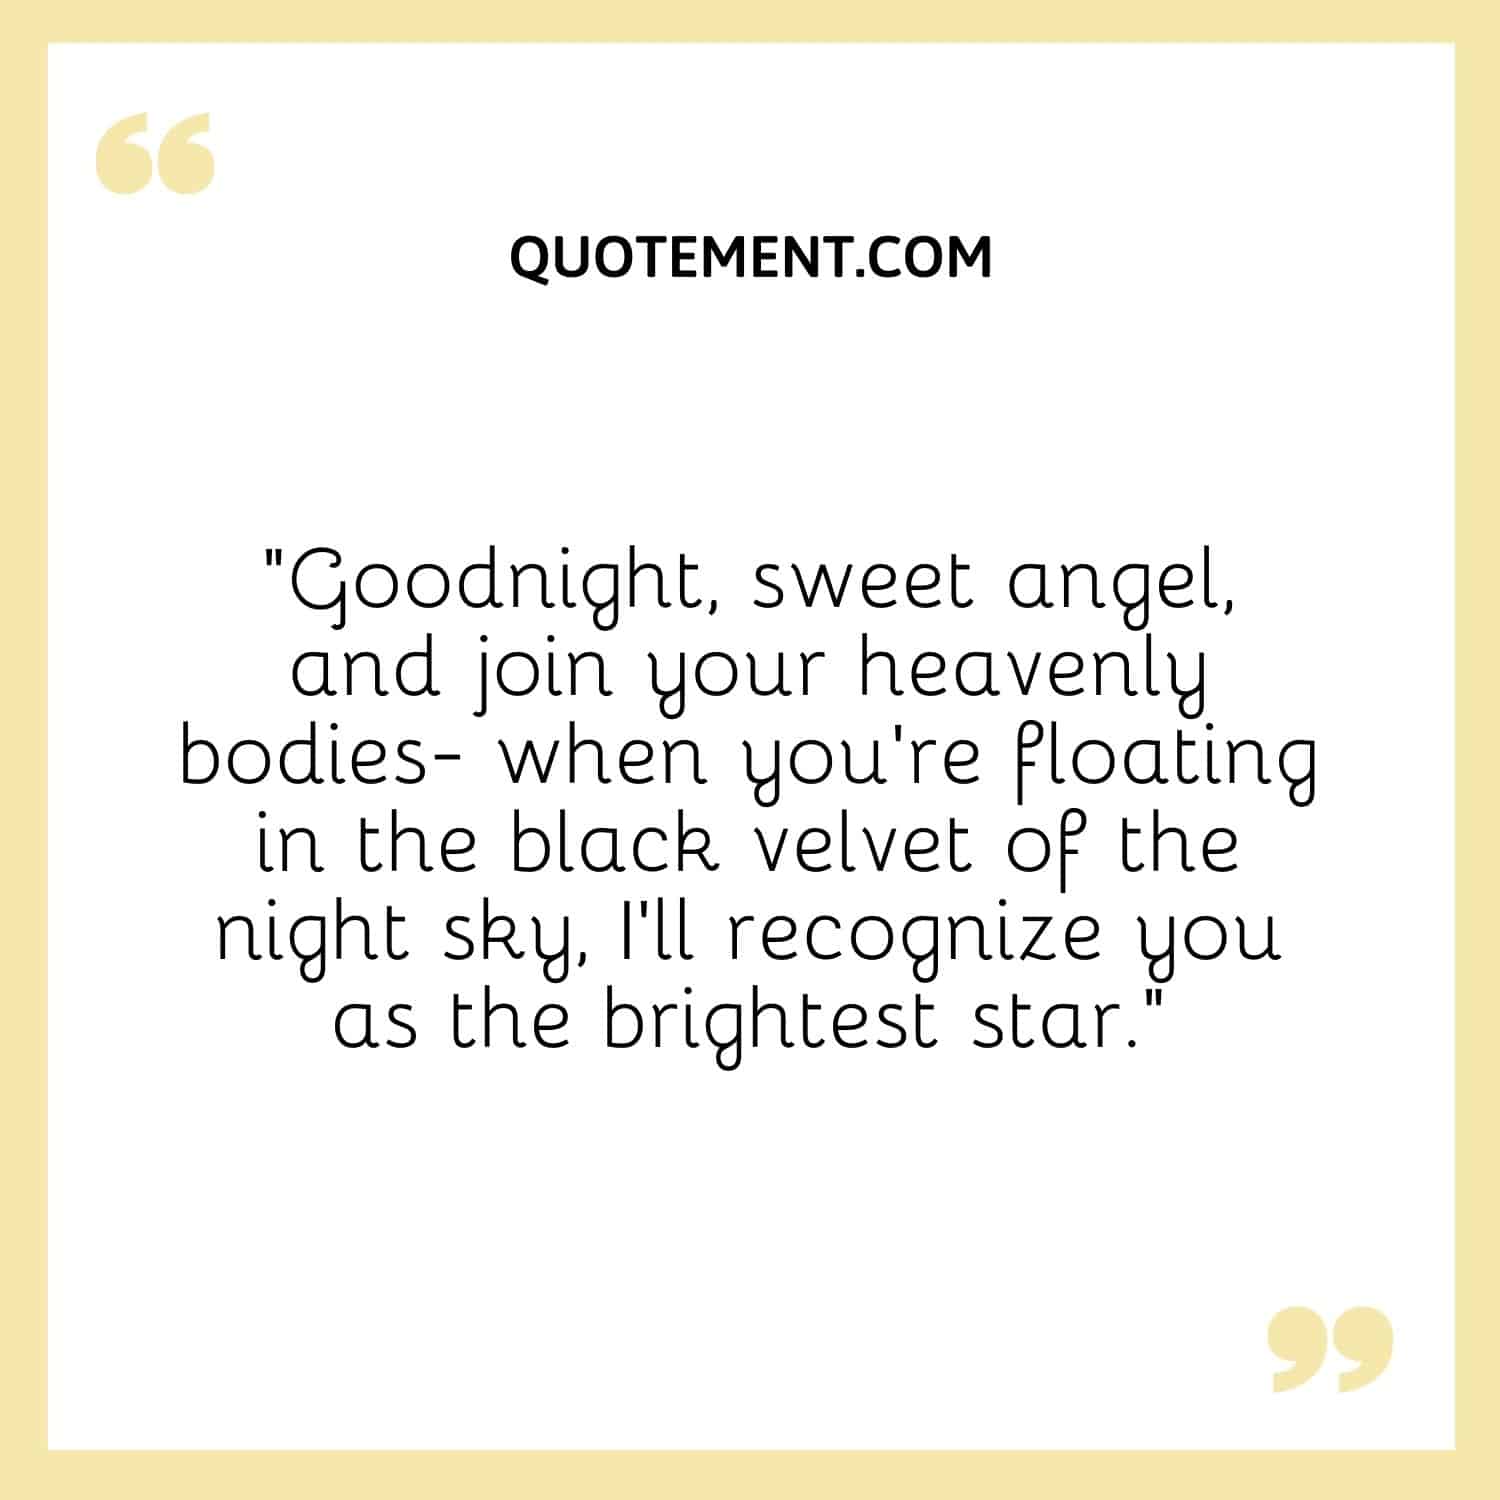 “Goodnight, sweet angel, and join your heavenly bodies- when you’re floating in the black velvet of the night sky, I’ll recognize you as the brightest star.”